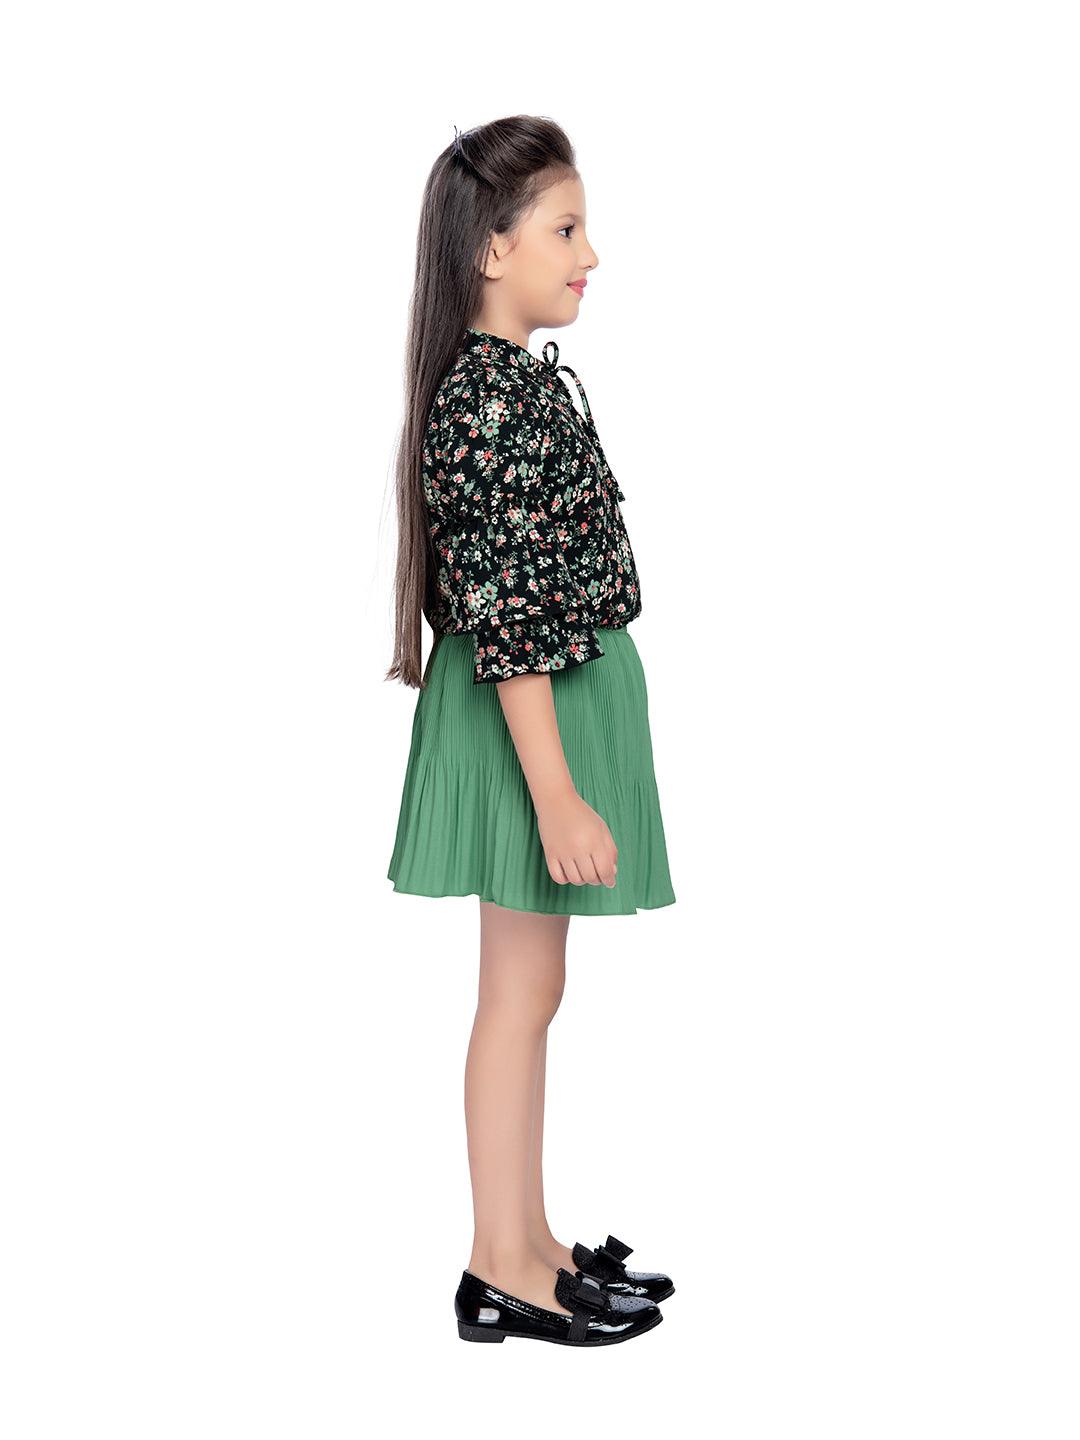 Tiny Baby Green Colored Skirt Top Set - 2118 Green - TINY BABY INDIA shop.tinybaby.in